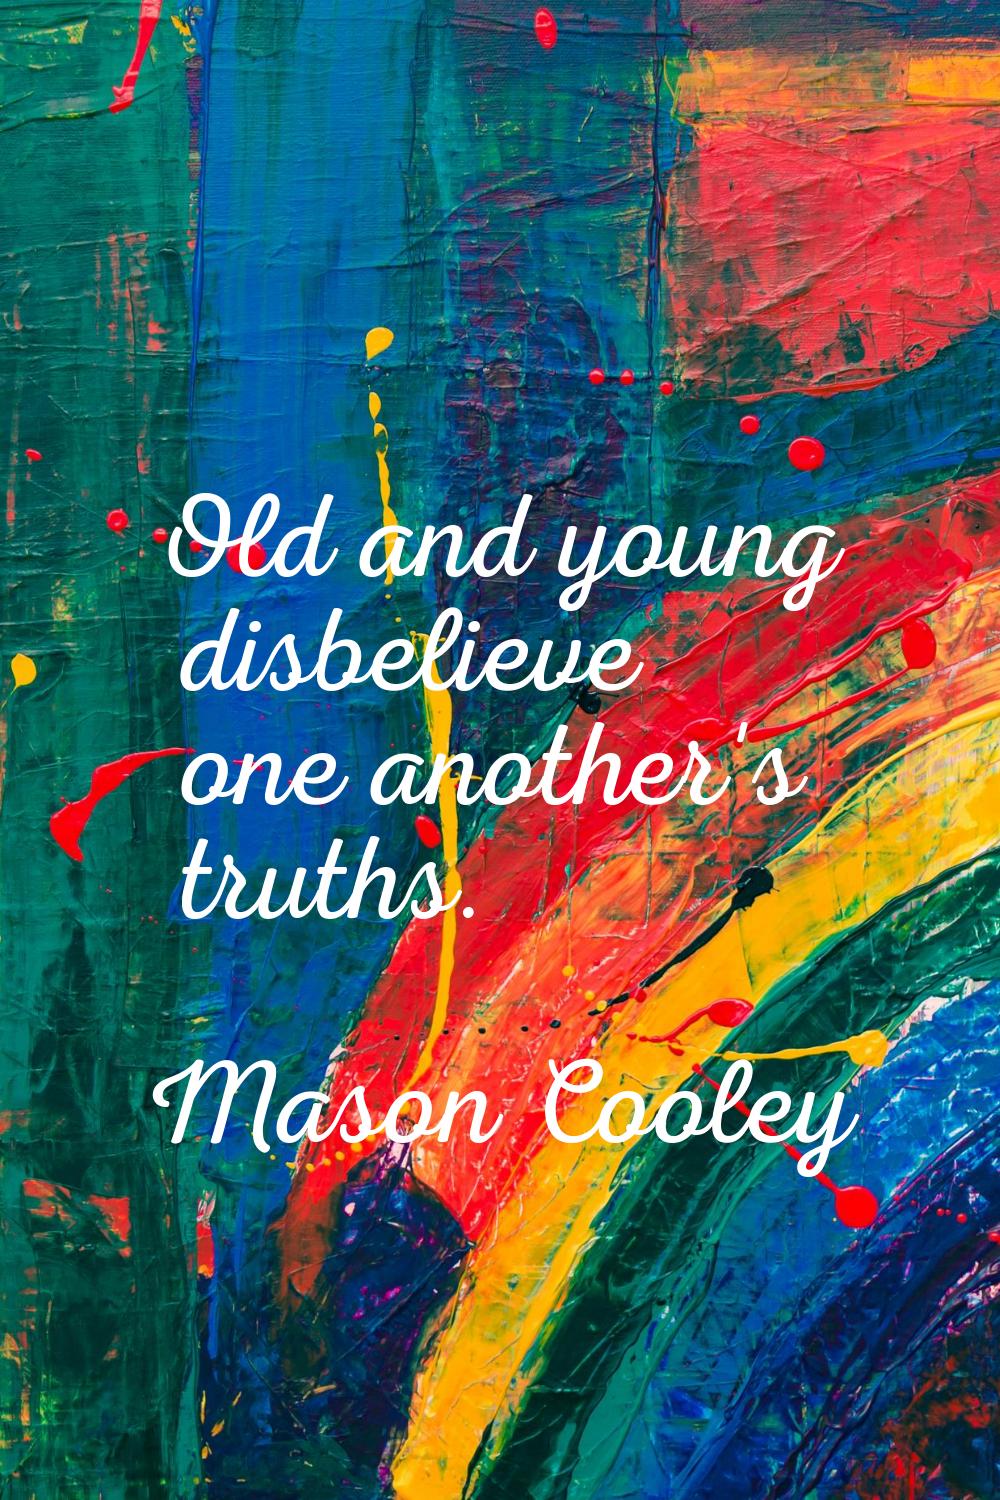 Old and young disbelieve one another's truths.